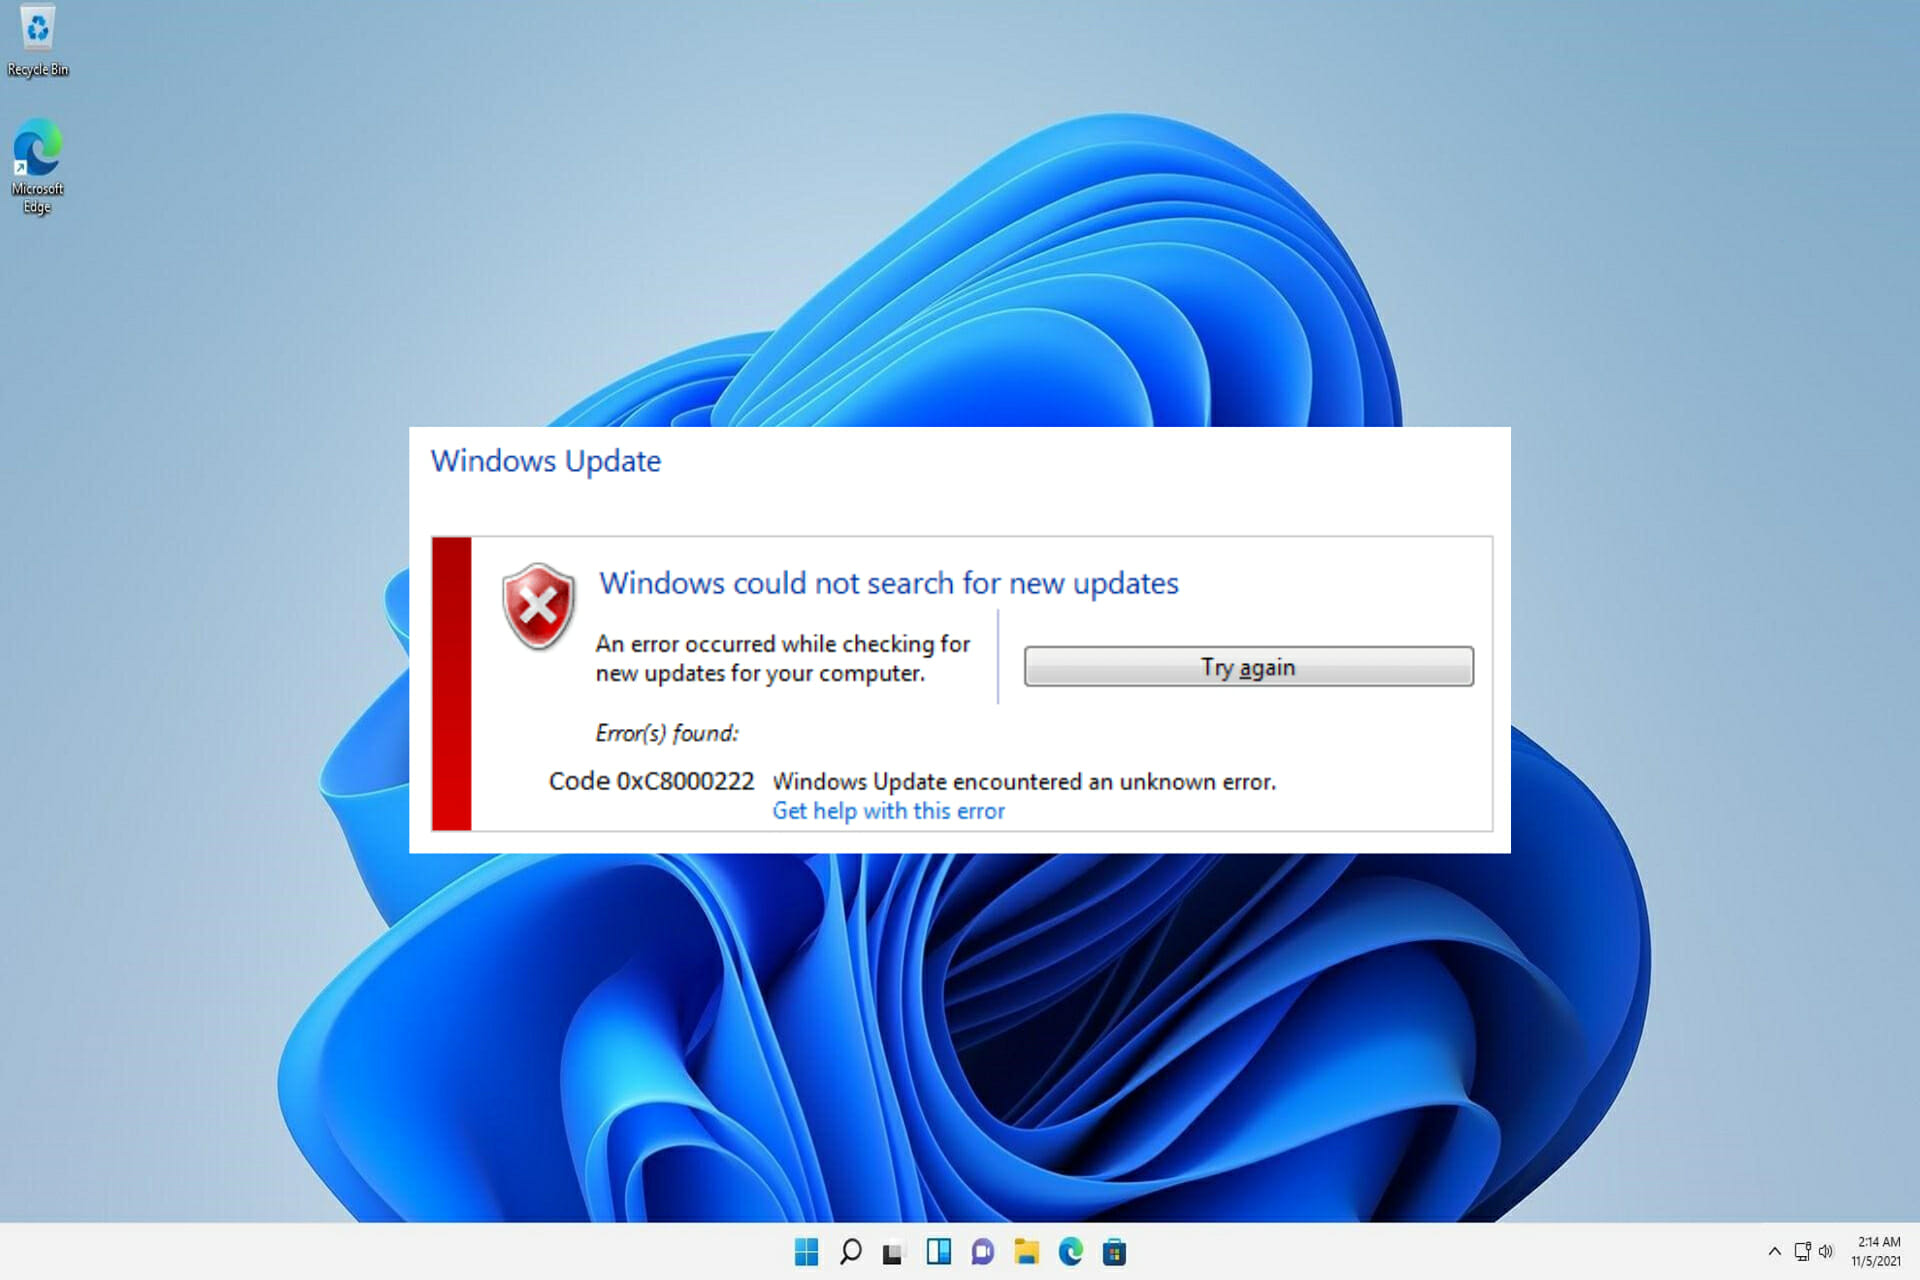 How Do I Fix Windows Update Encountered an Unknown Error? 